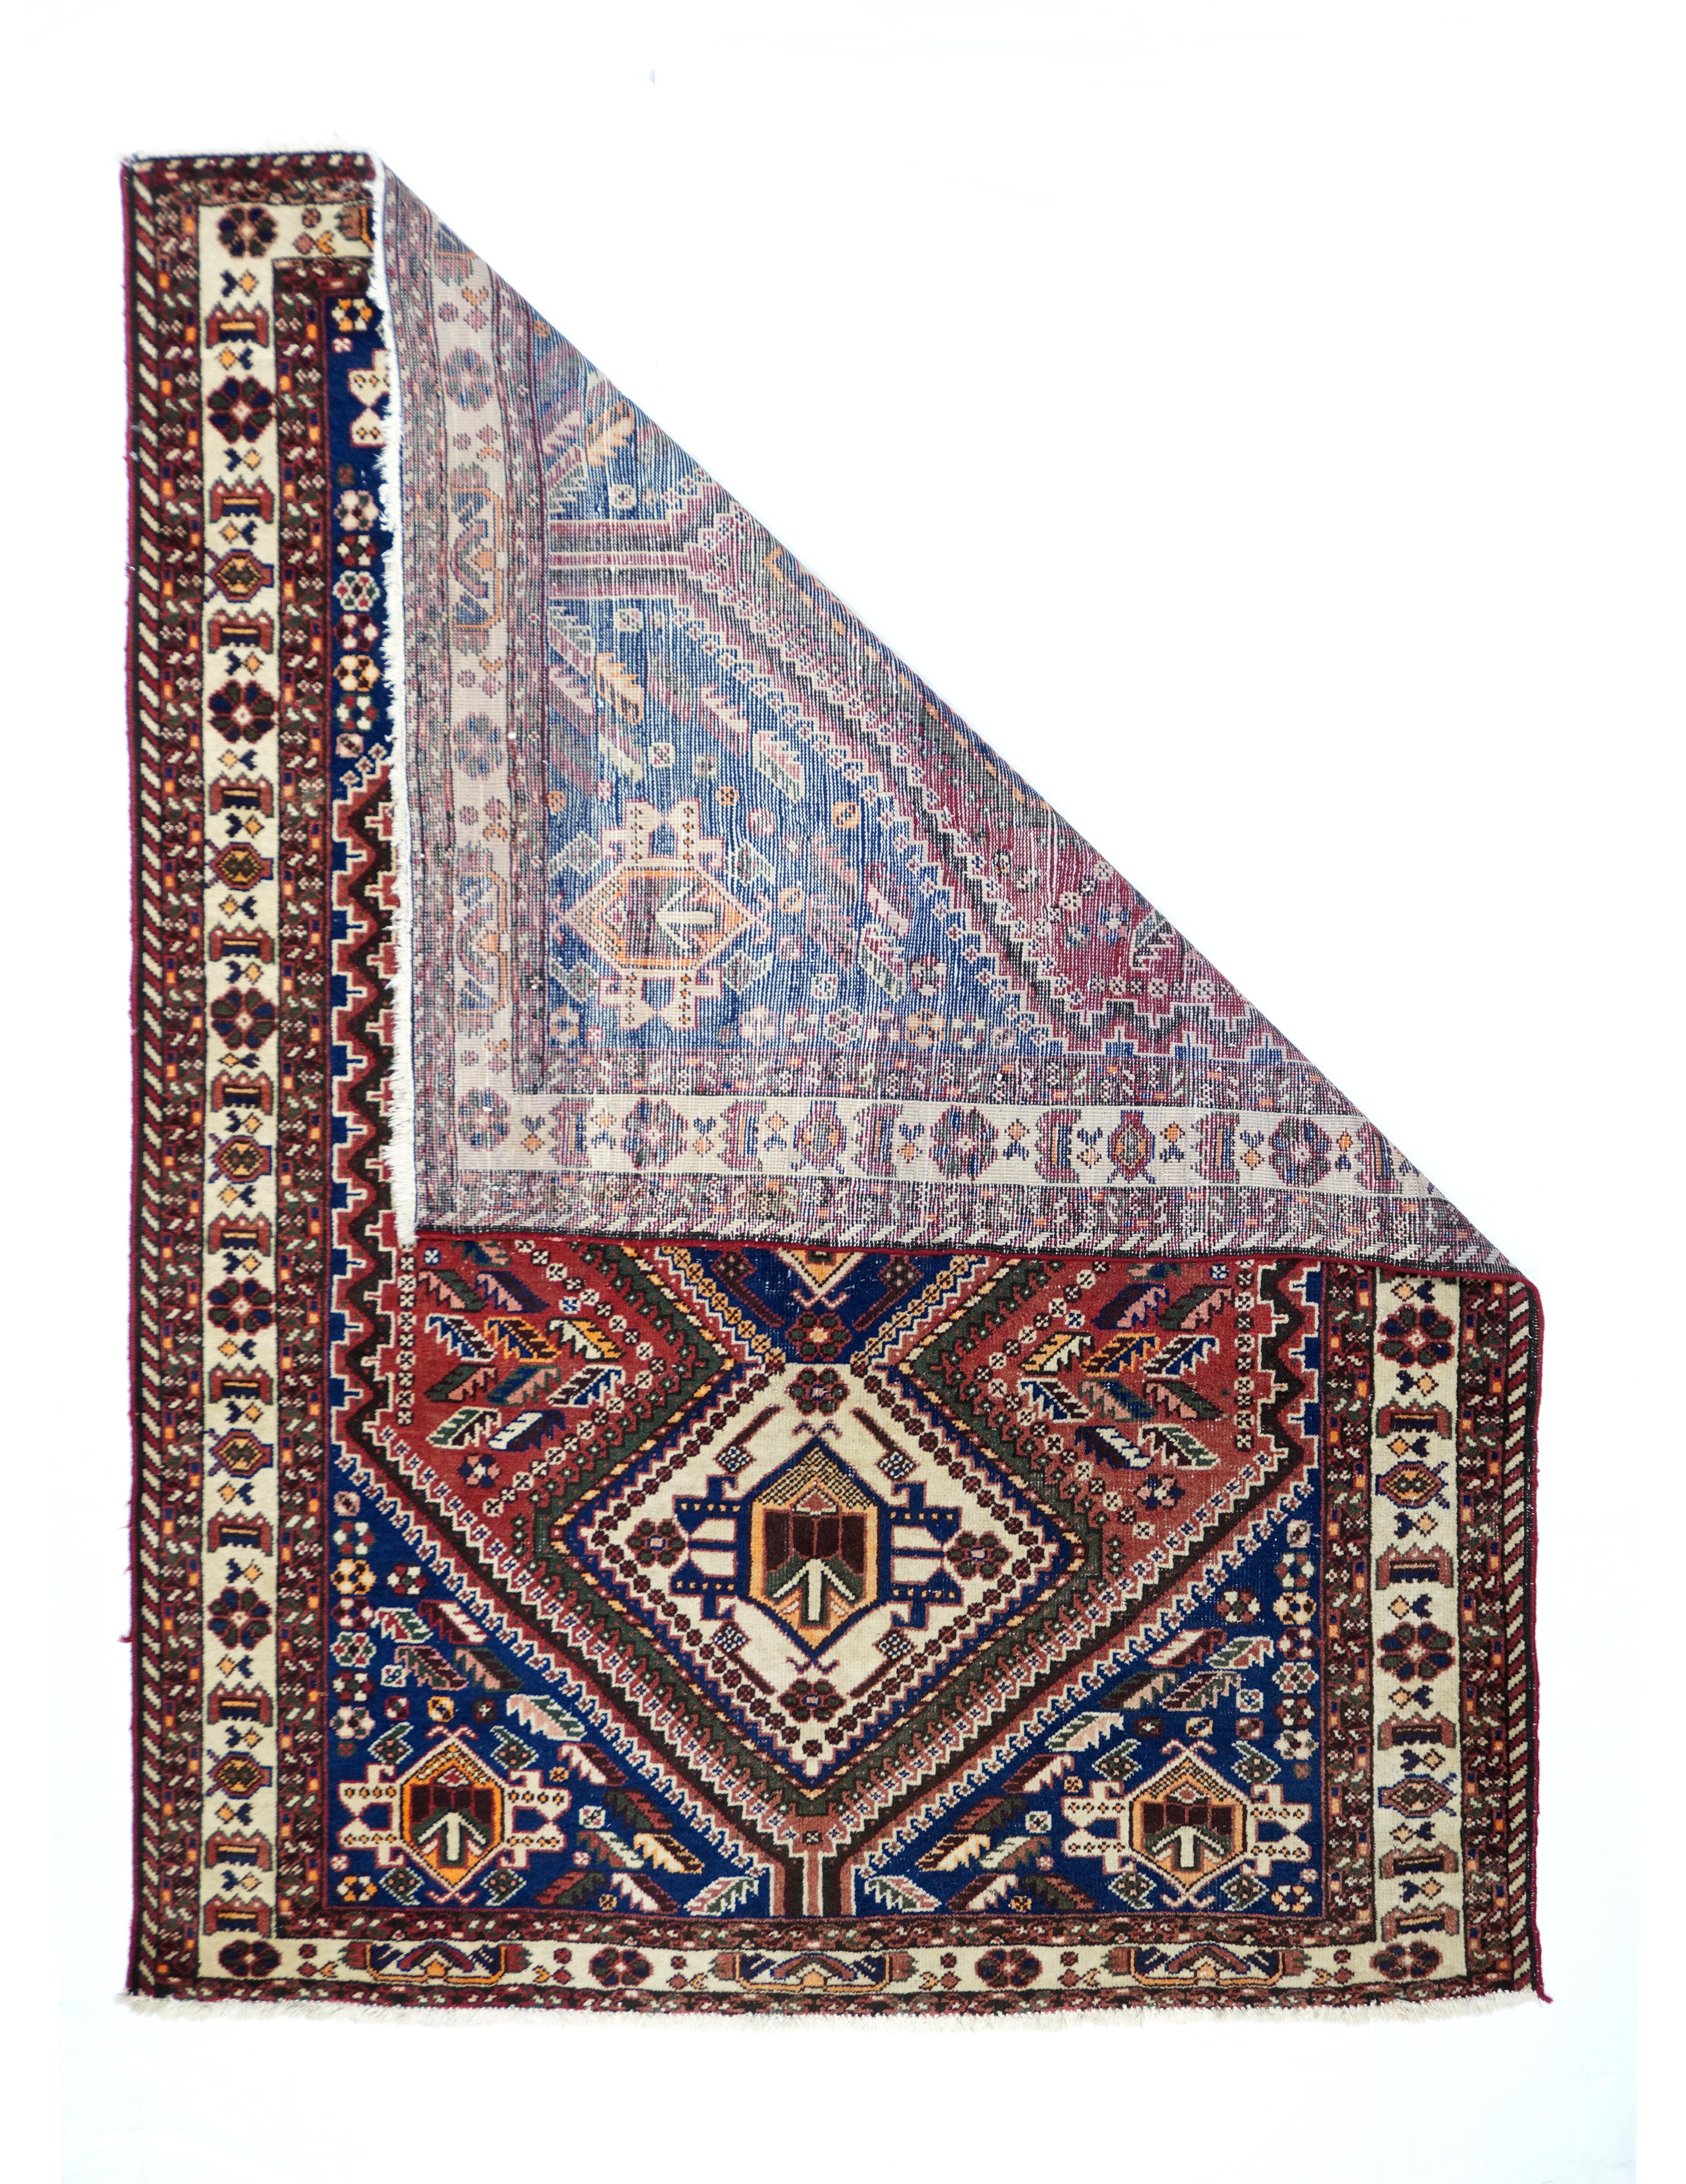 Vintage Qashqai rug¬†5' x 6'11''. A pole medallion of three bnest4ed, stepped, conjoint octagons in old ivory and royal blue, with angular 